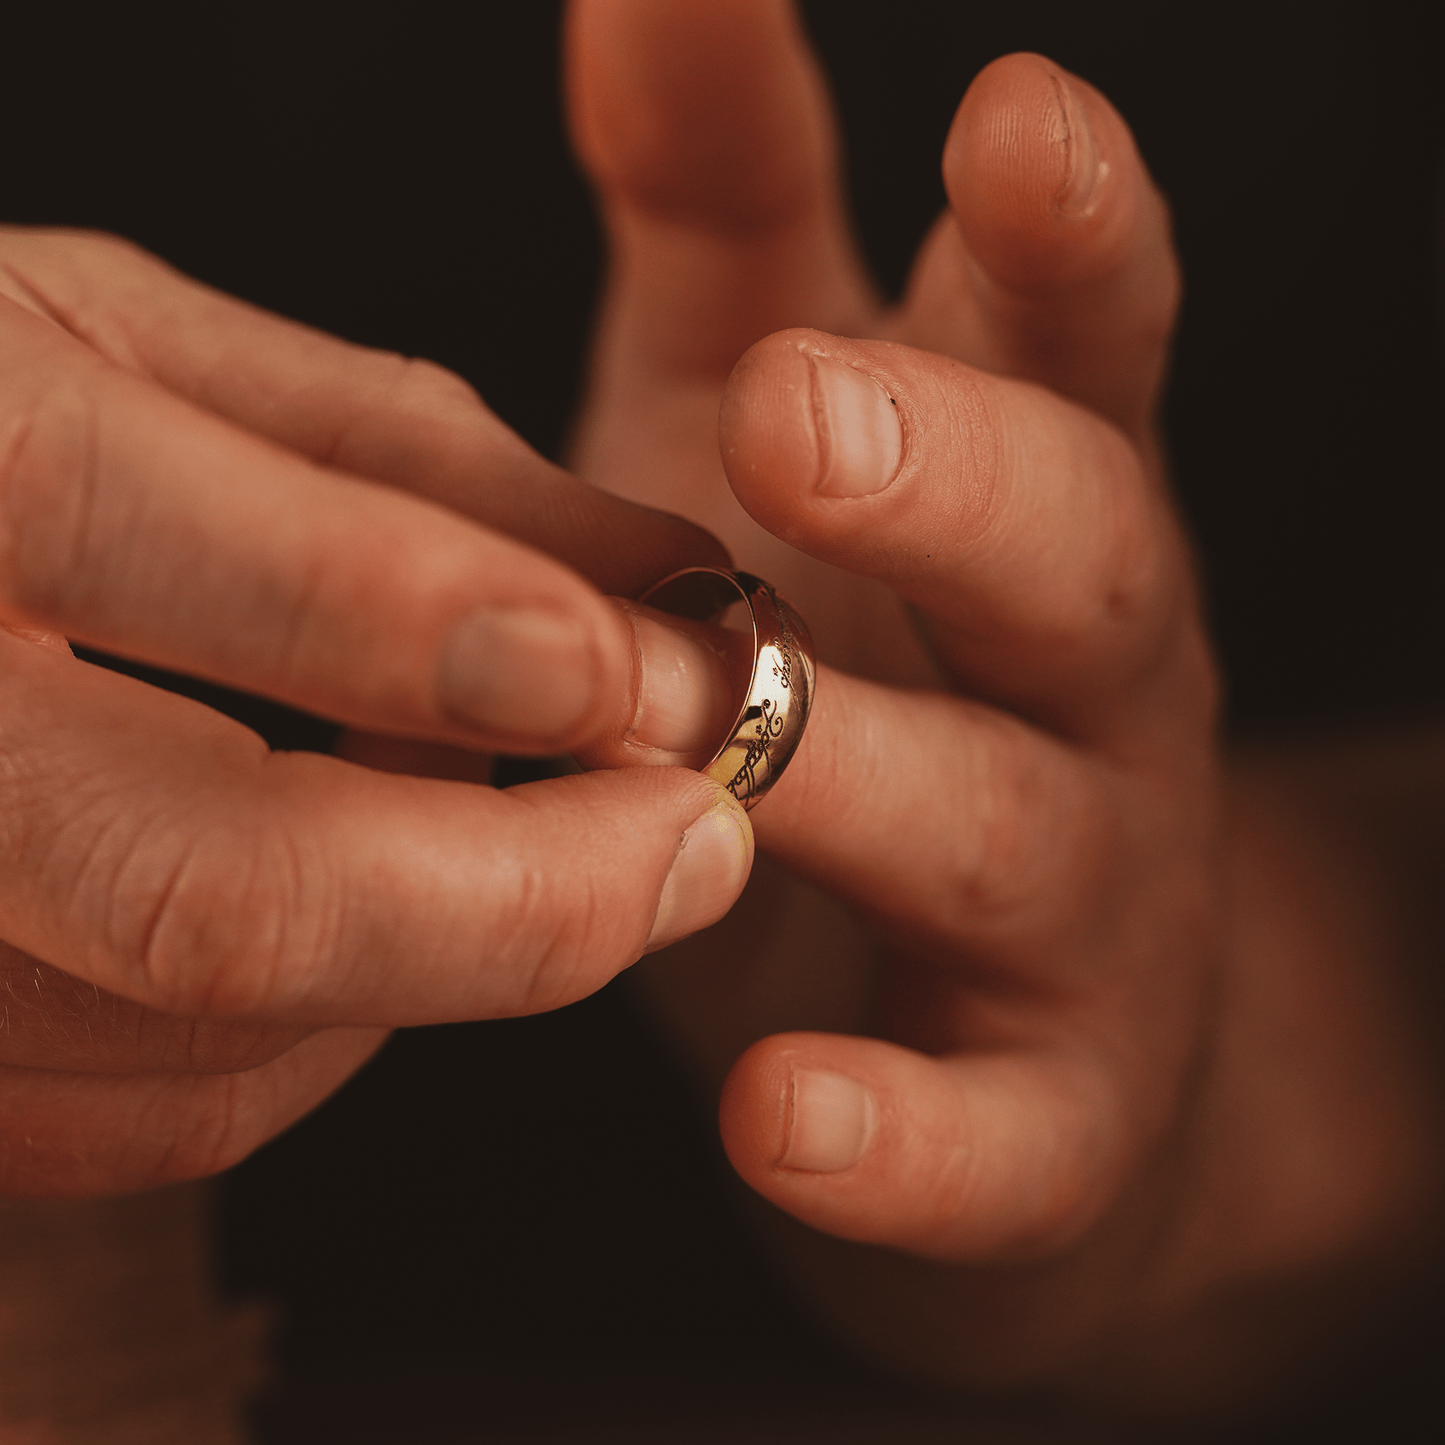 The One Ring™️ - Men's Wedding Rings - Manly Bands